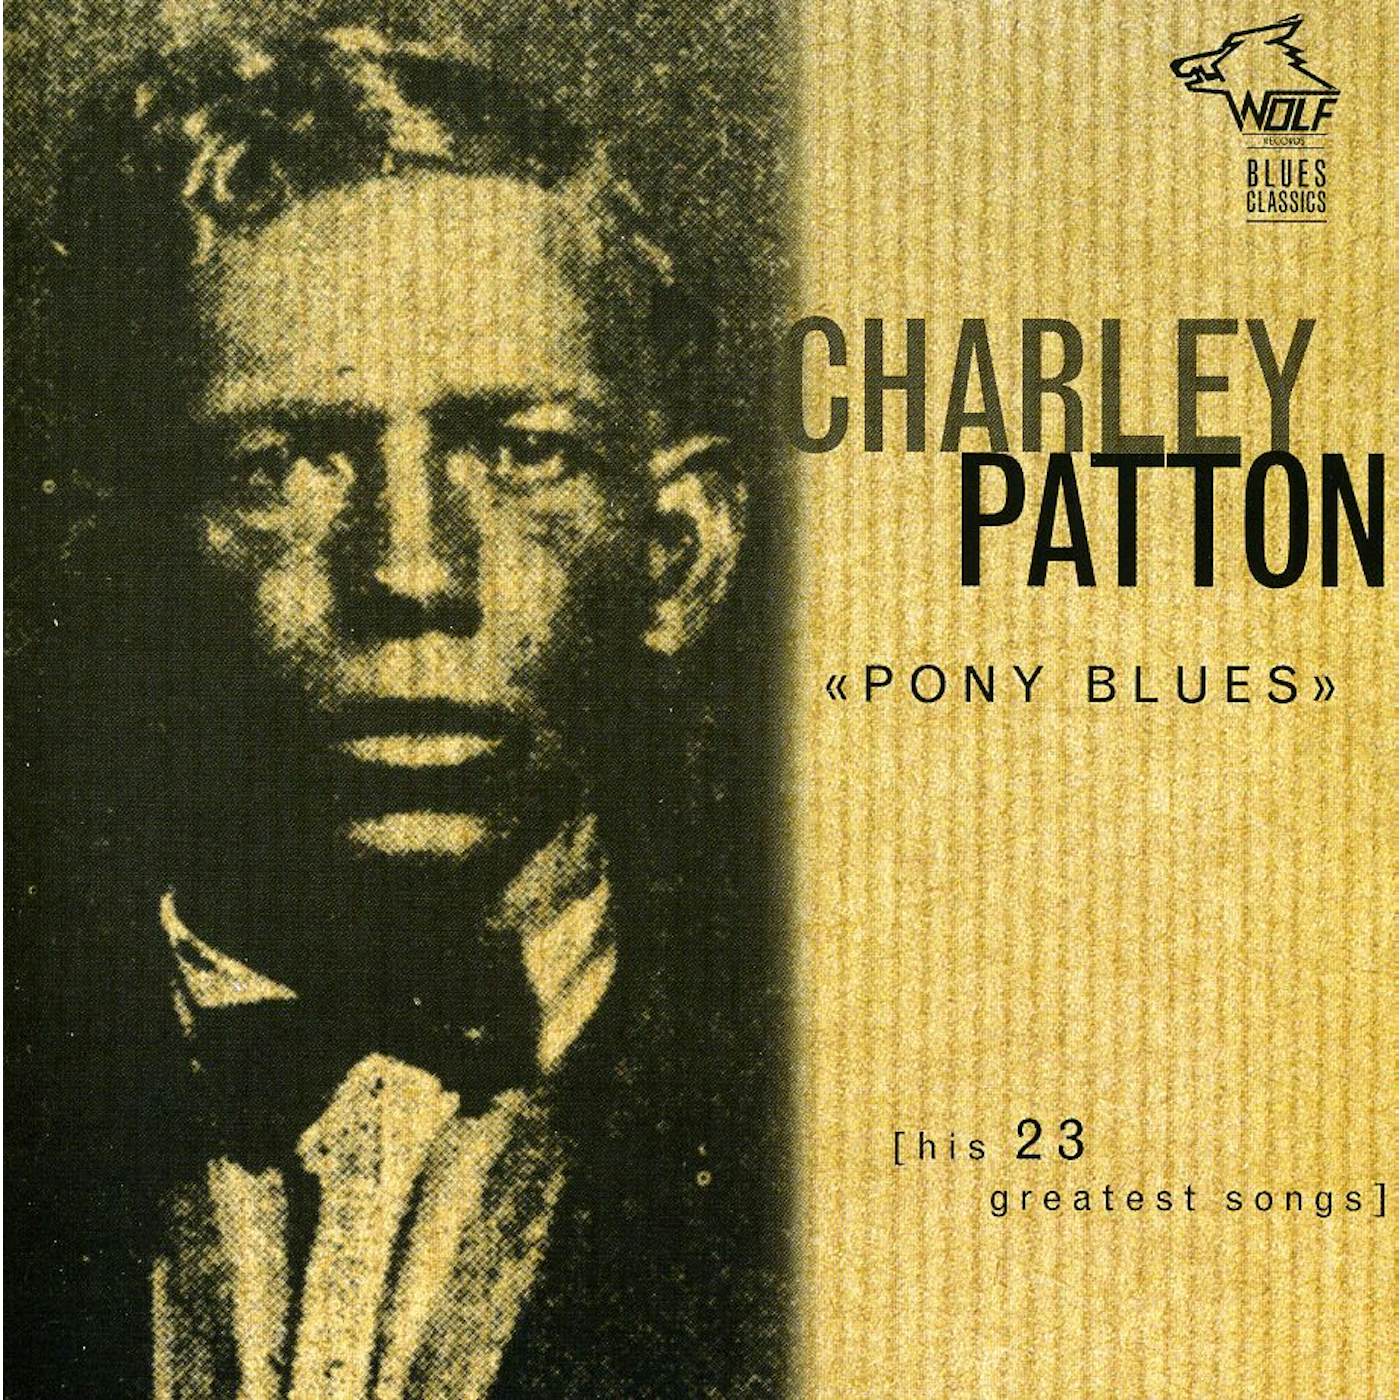 Charley Patton PONY BLUES: HIS 23 GREATEST SONGS CD